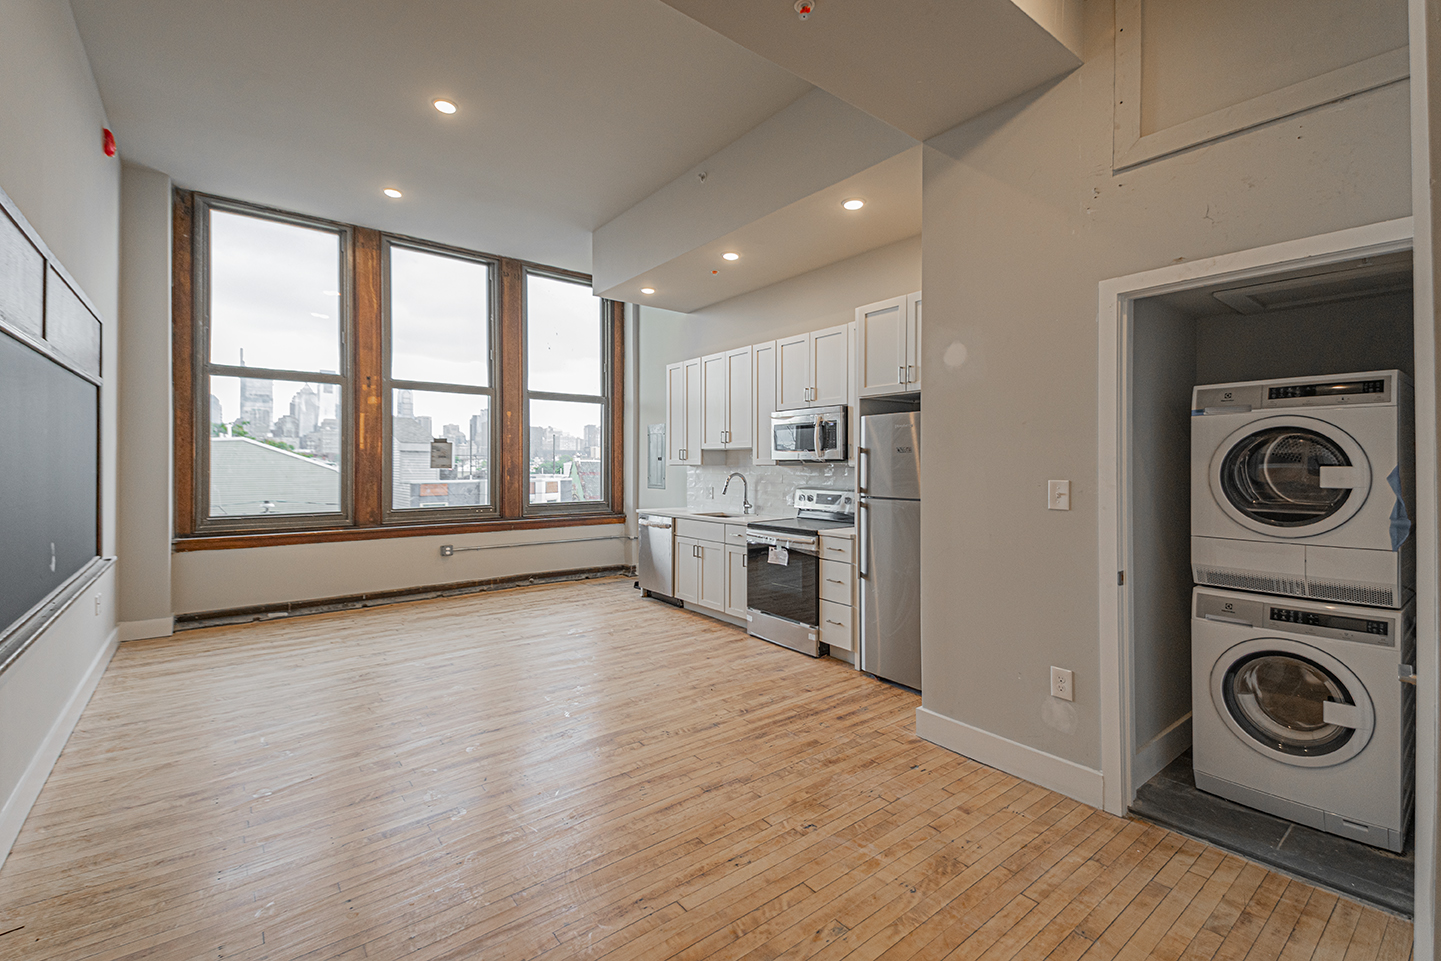 Property Photo For 1300 S. 19th St, Unit 305